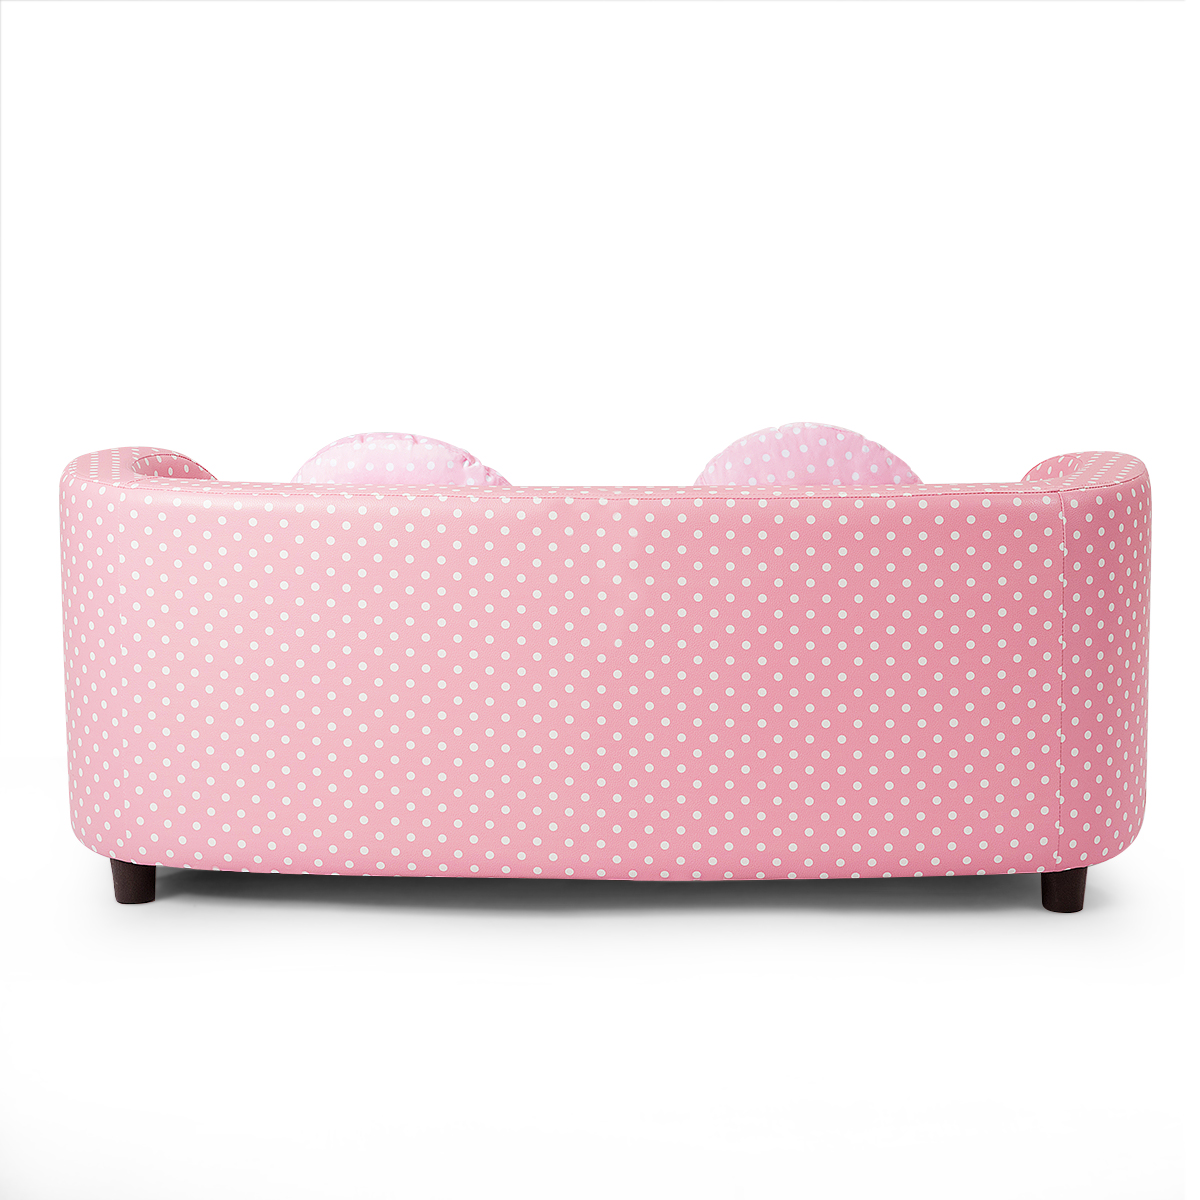 Topbuy 2 Seats Kids Couch Armrest Chair Playroom Furniture Two Cloth Pillows Pink